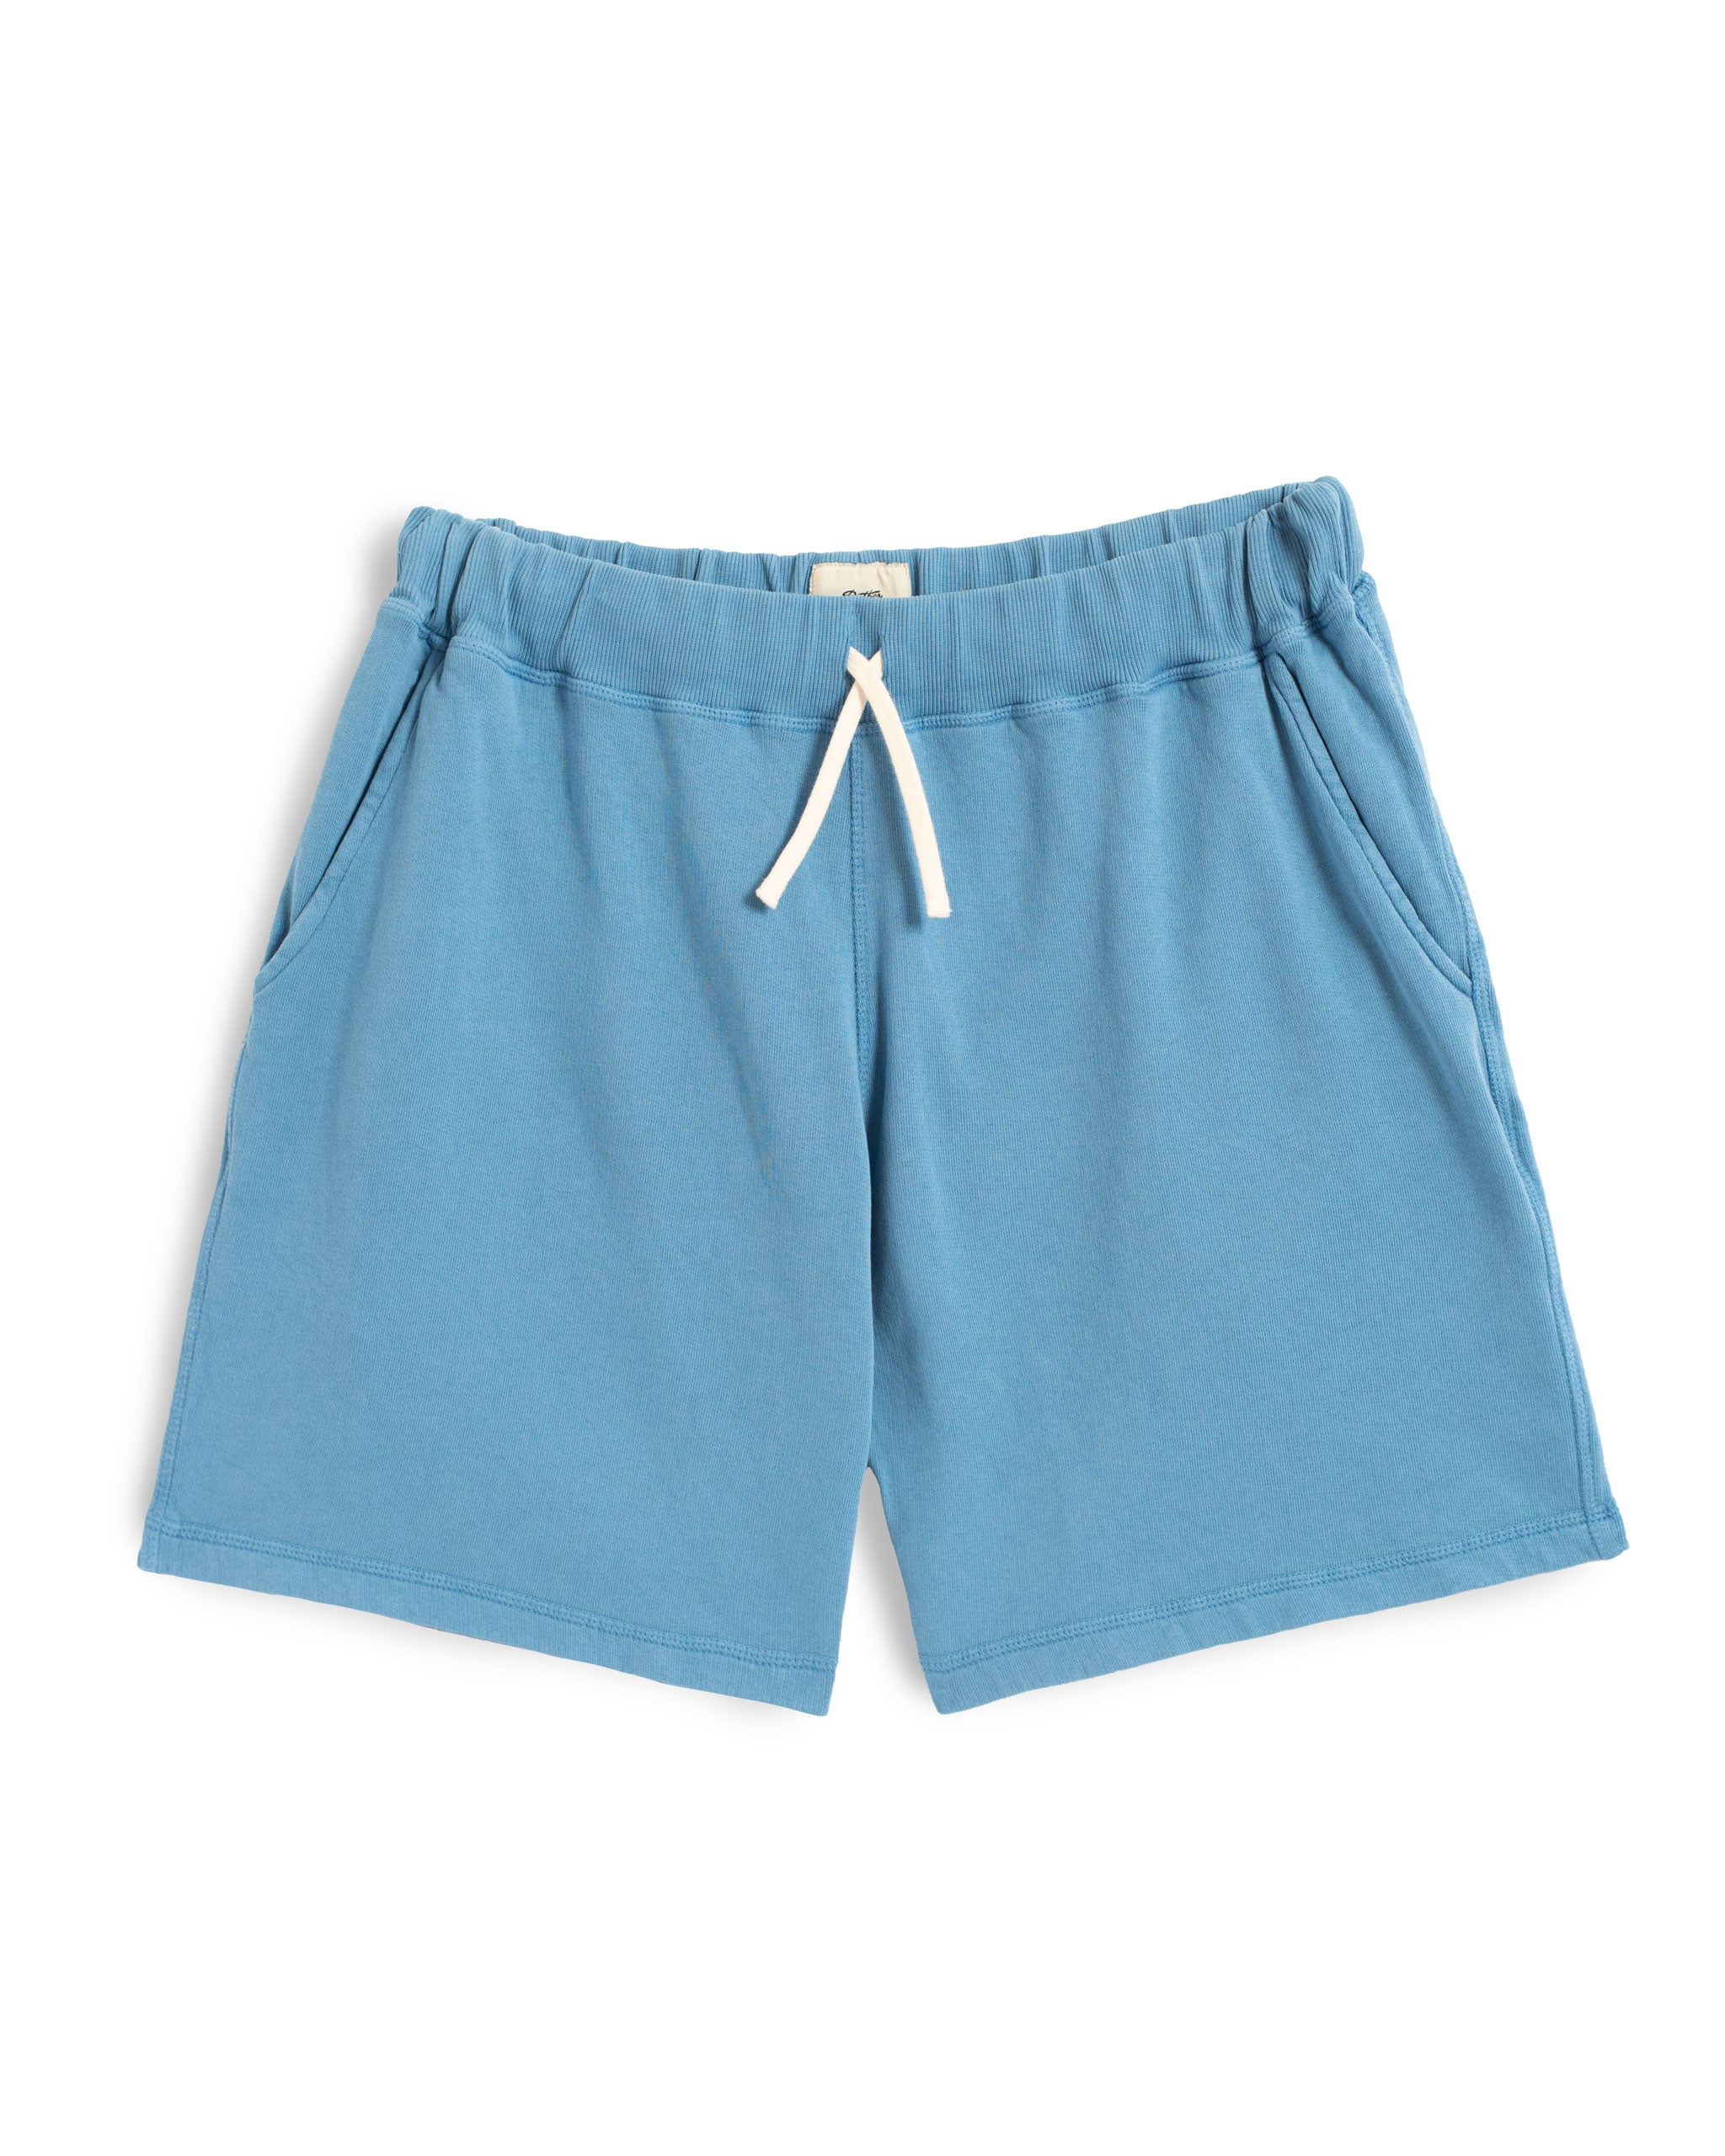 Solid Blue French Terry Cotton Sweat Shorts